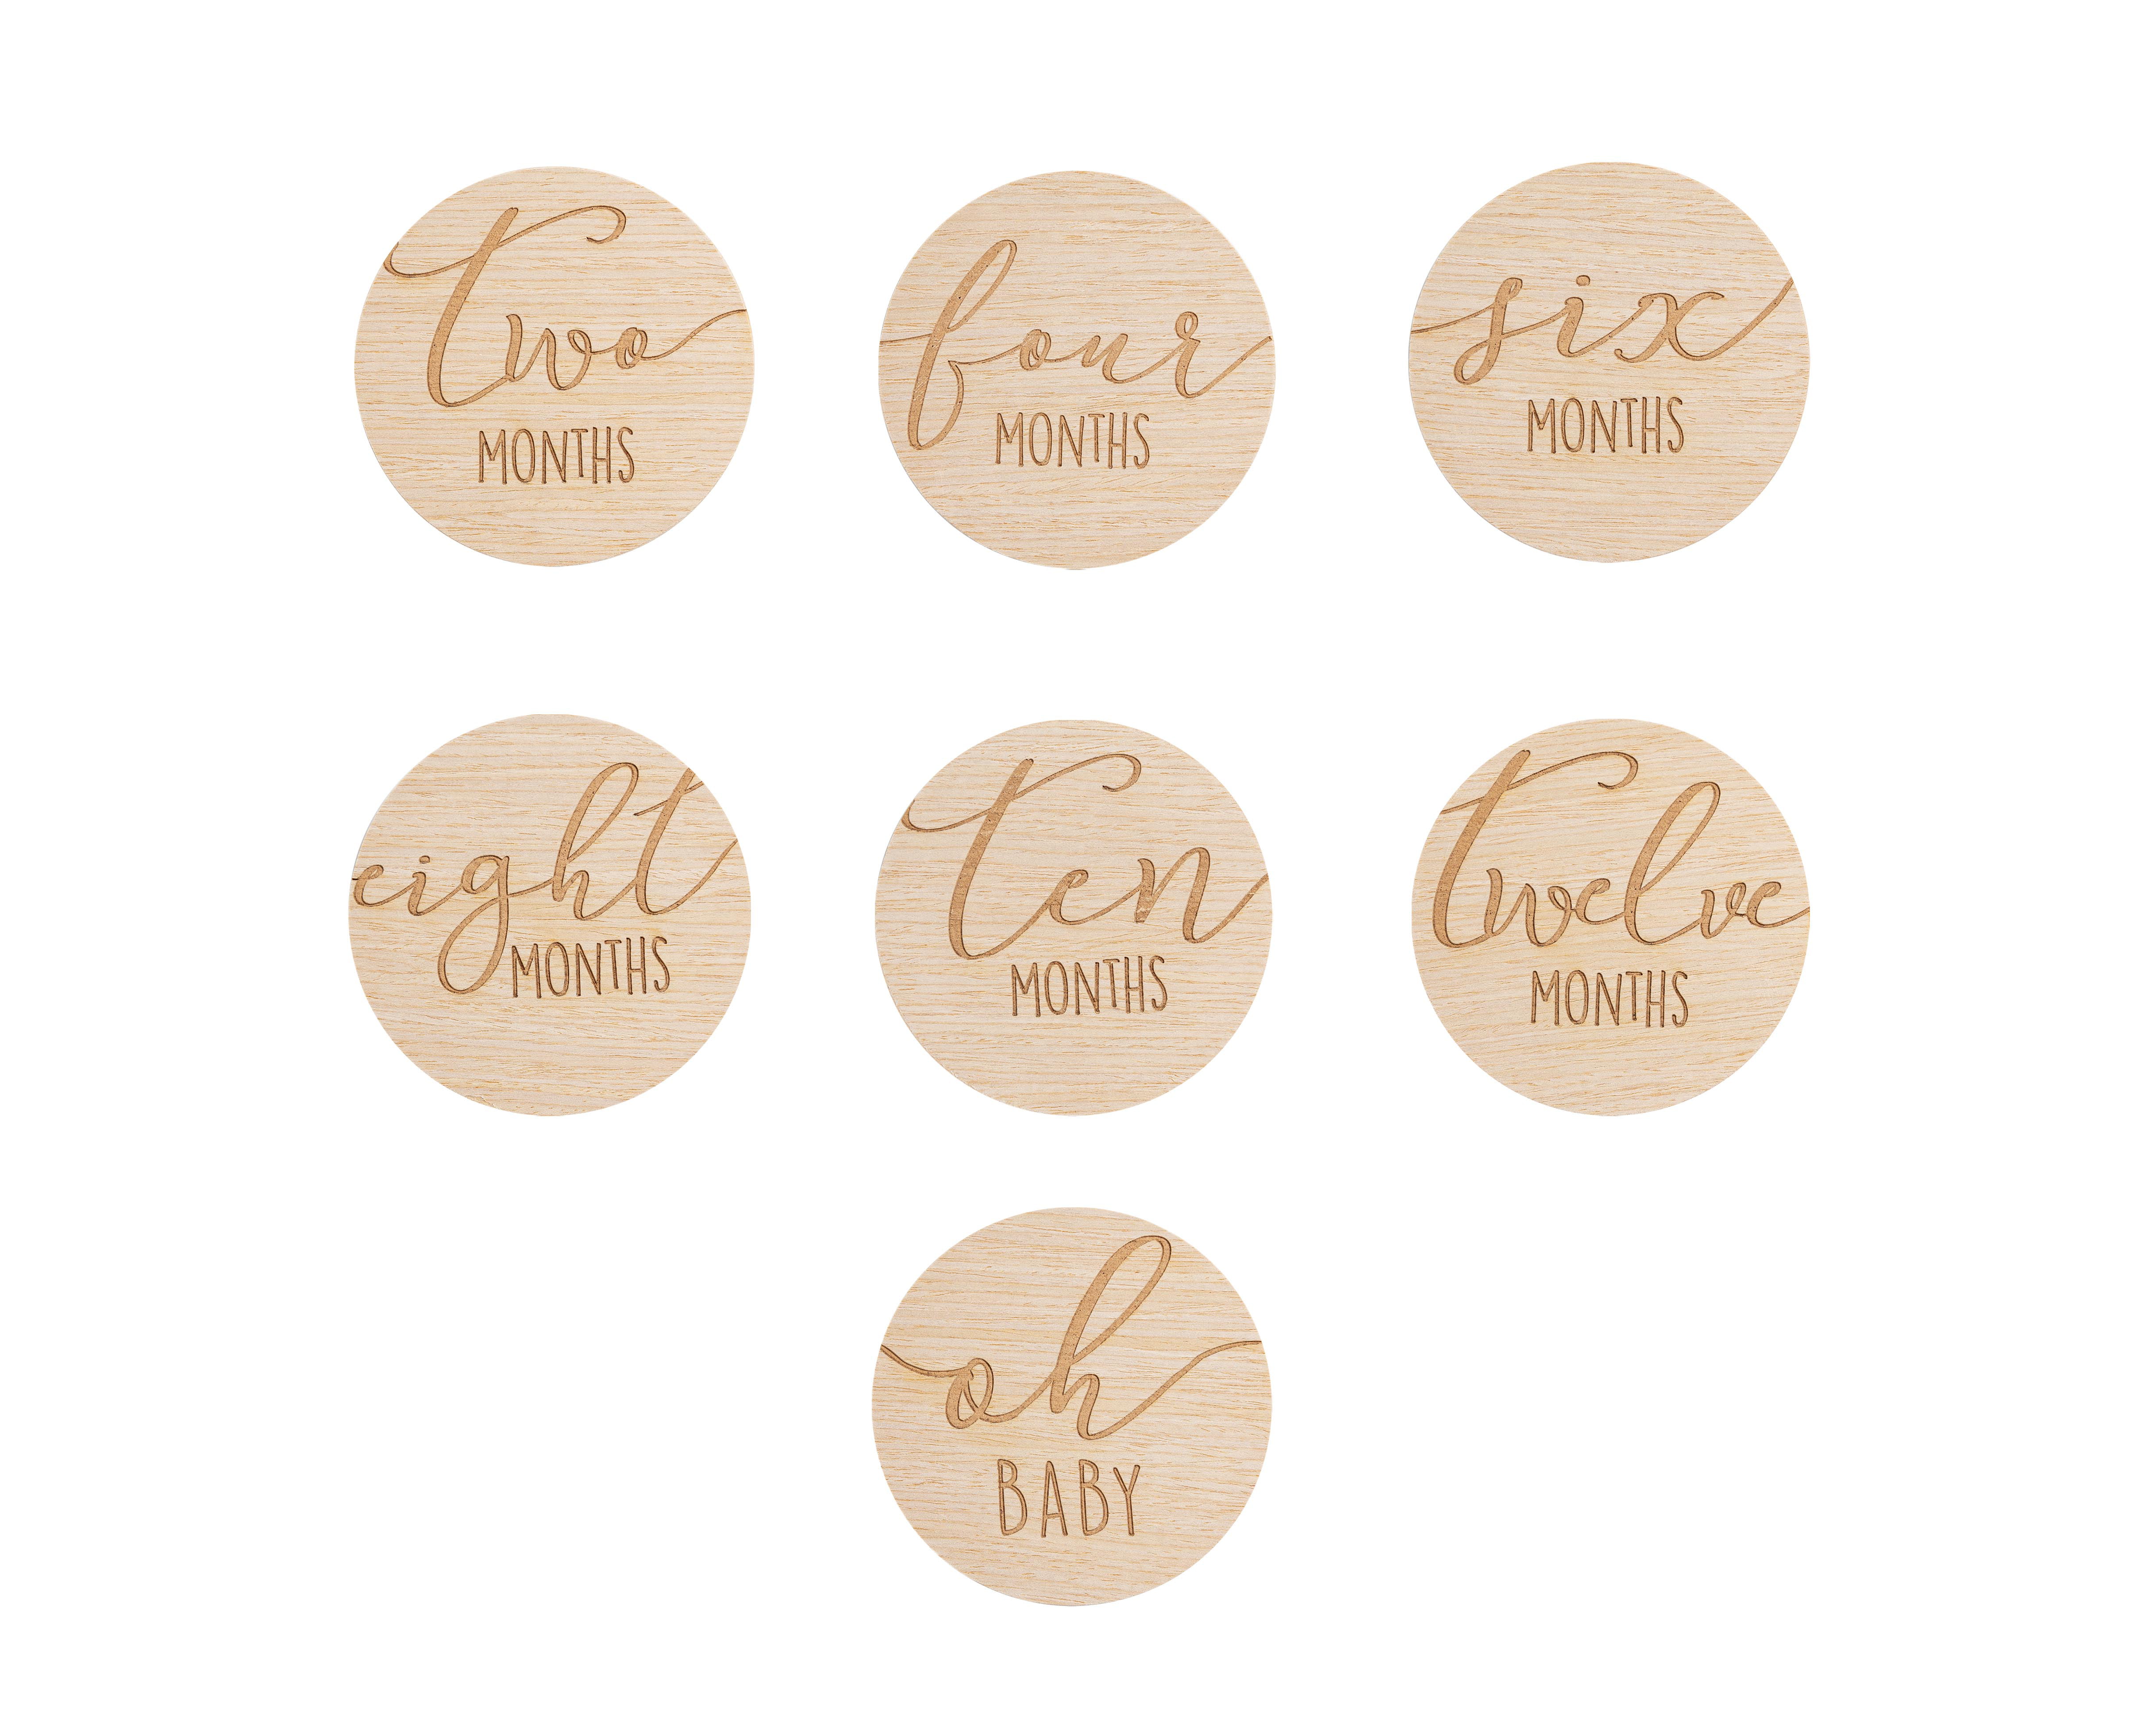 Light Wood Kate & Milo Wooden Weekly Baby Pregnancy Announcement Cards Doble Sided Photo Prop Milestone Discs 